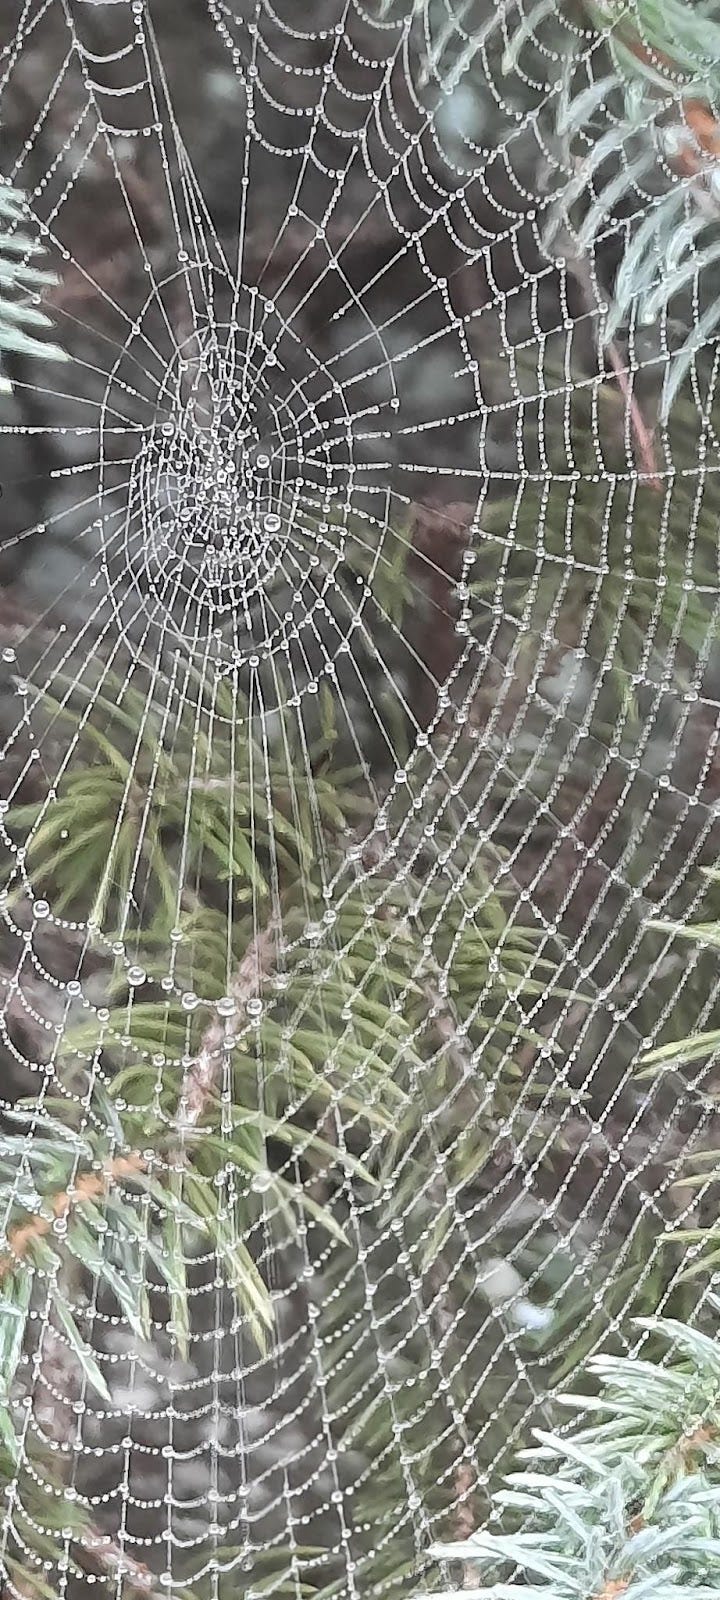 Web covered in dew. This morning there were about ten webs all along the west side of the cemetery hanging from spruce trees.